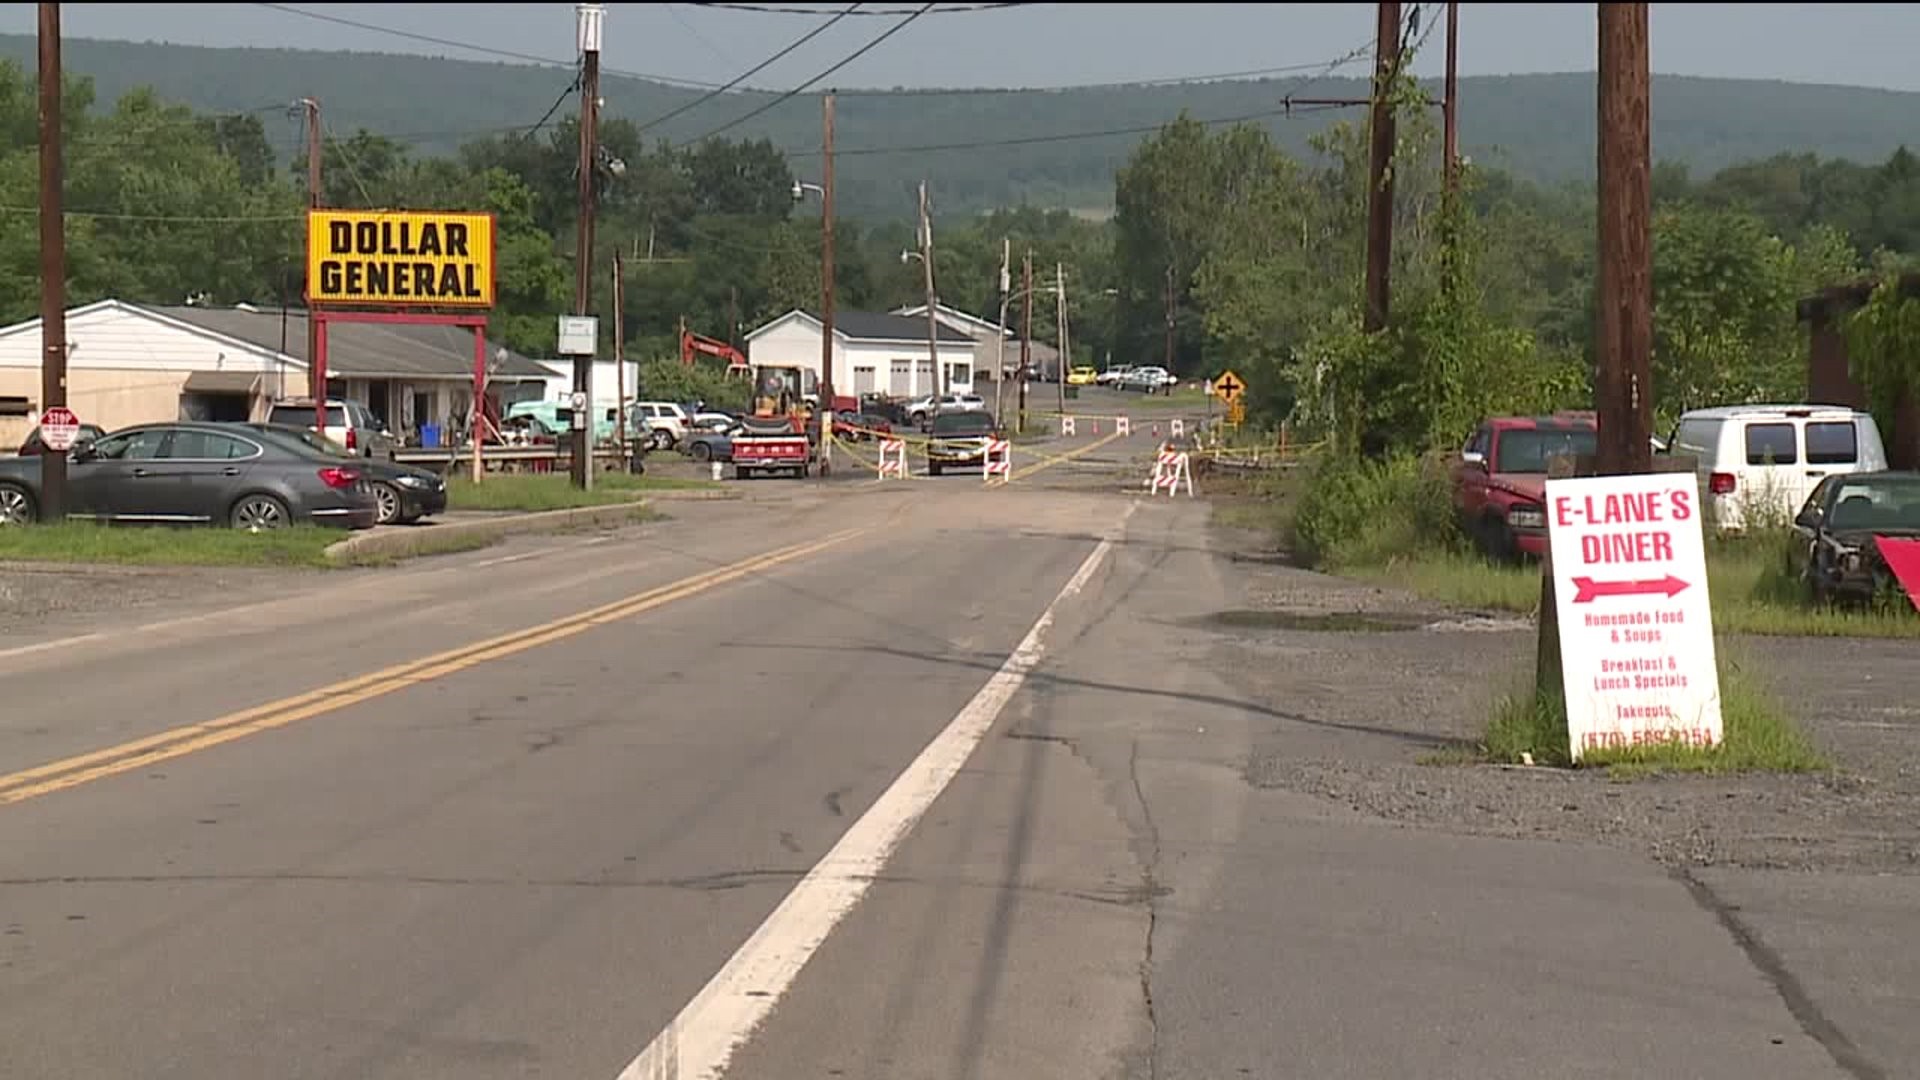 Flood Damage Hurting Businesses in Part of Lackawanna County